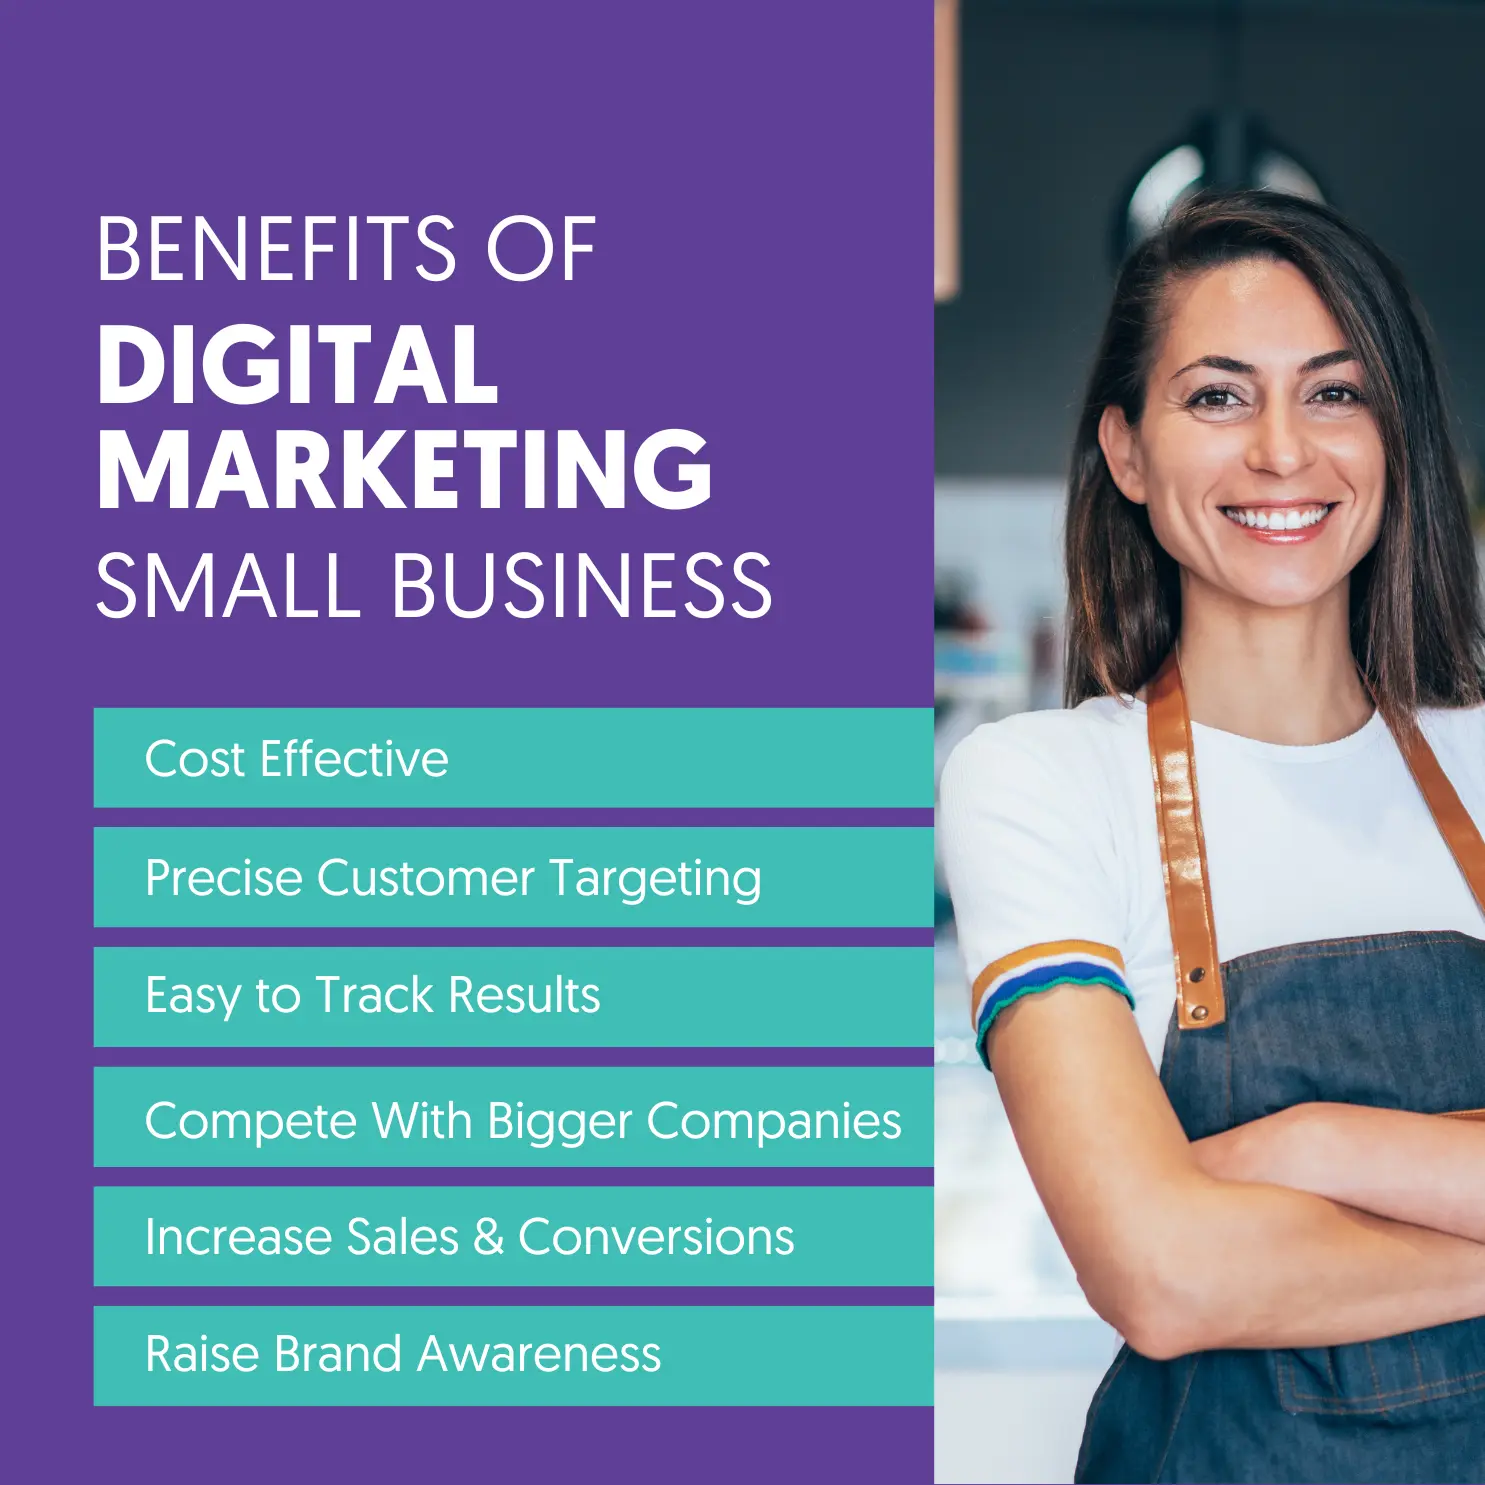 Benefits of Digital Marketing For Small Business